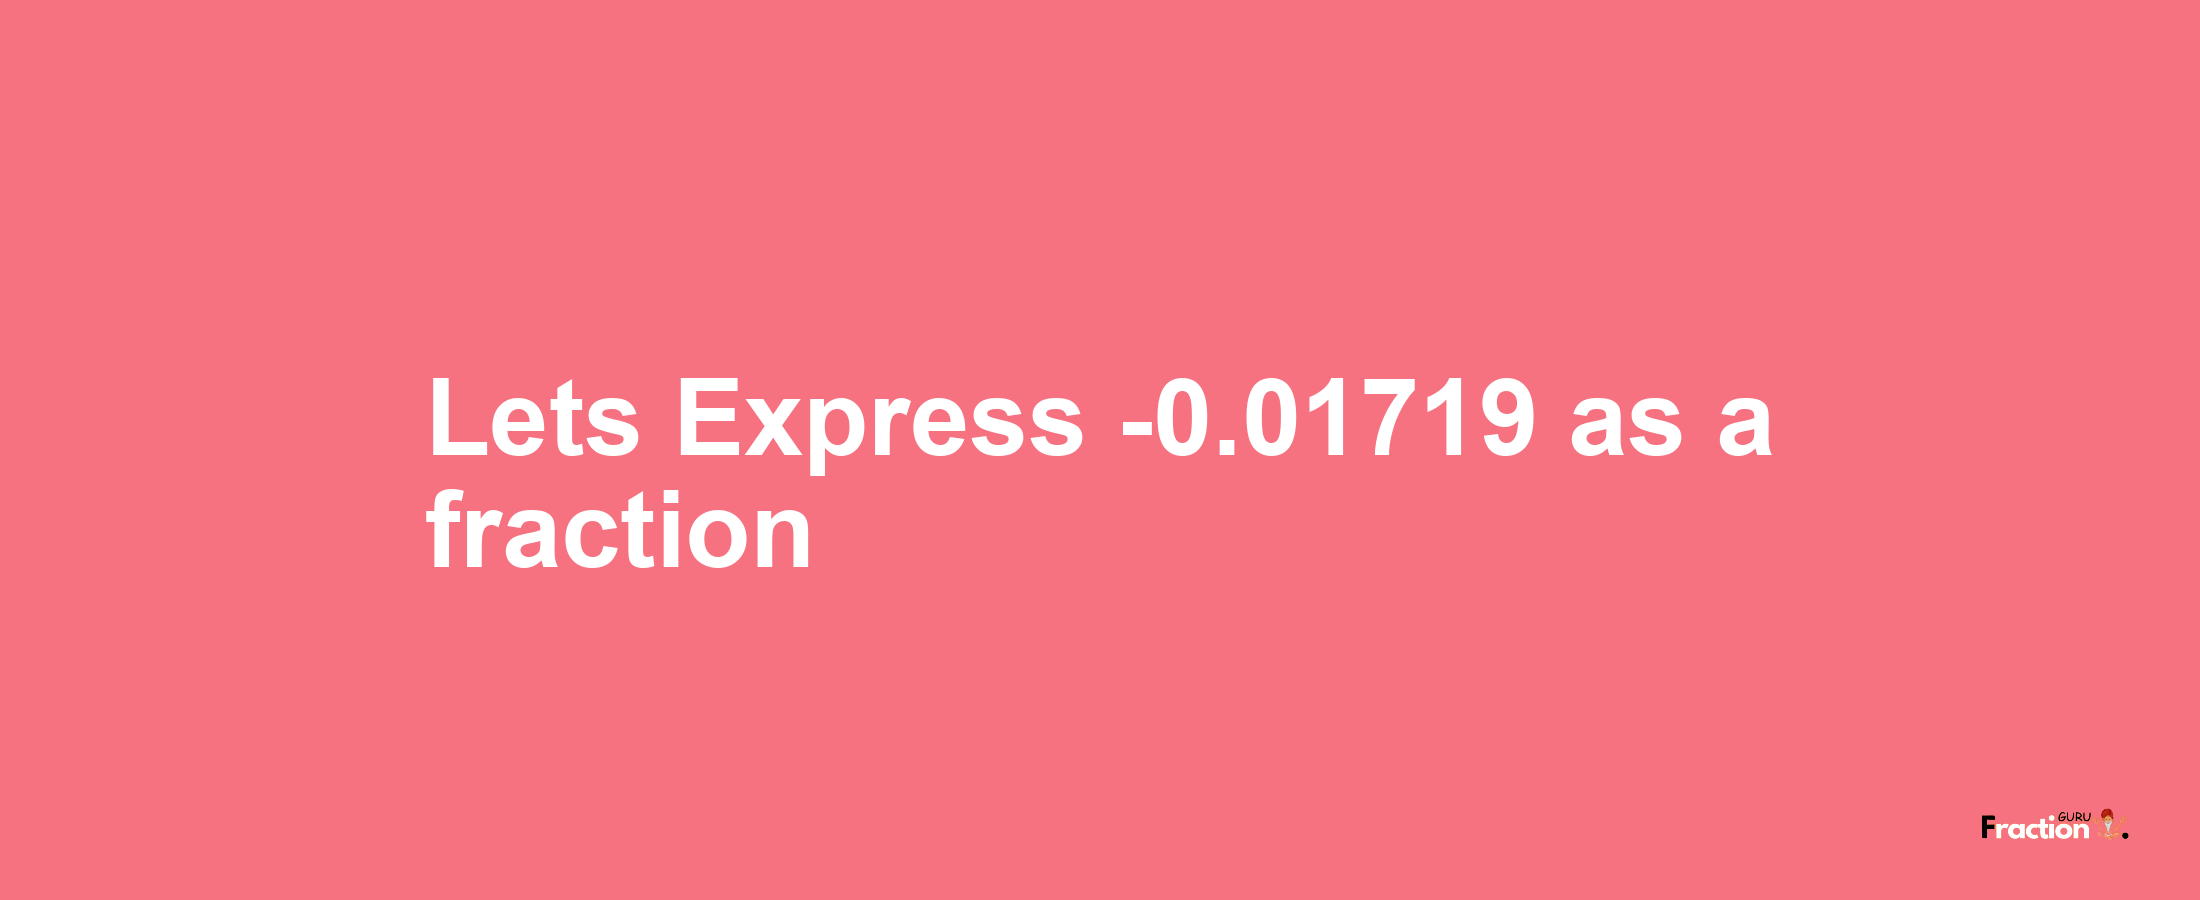 Lets Express -0.01719 as afraction